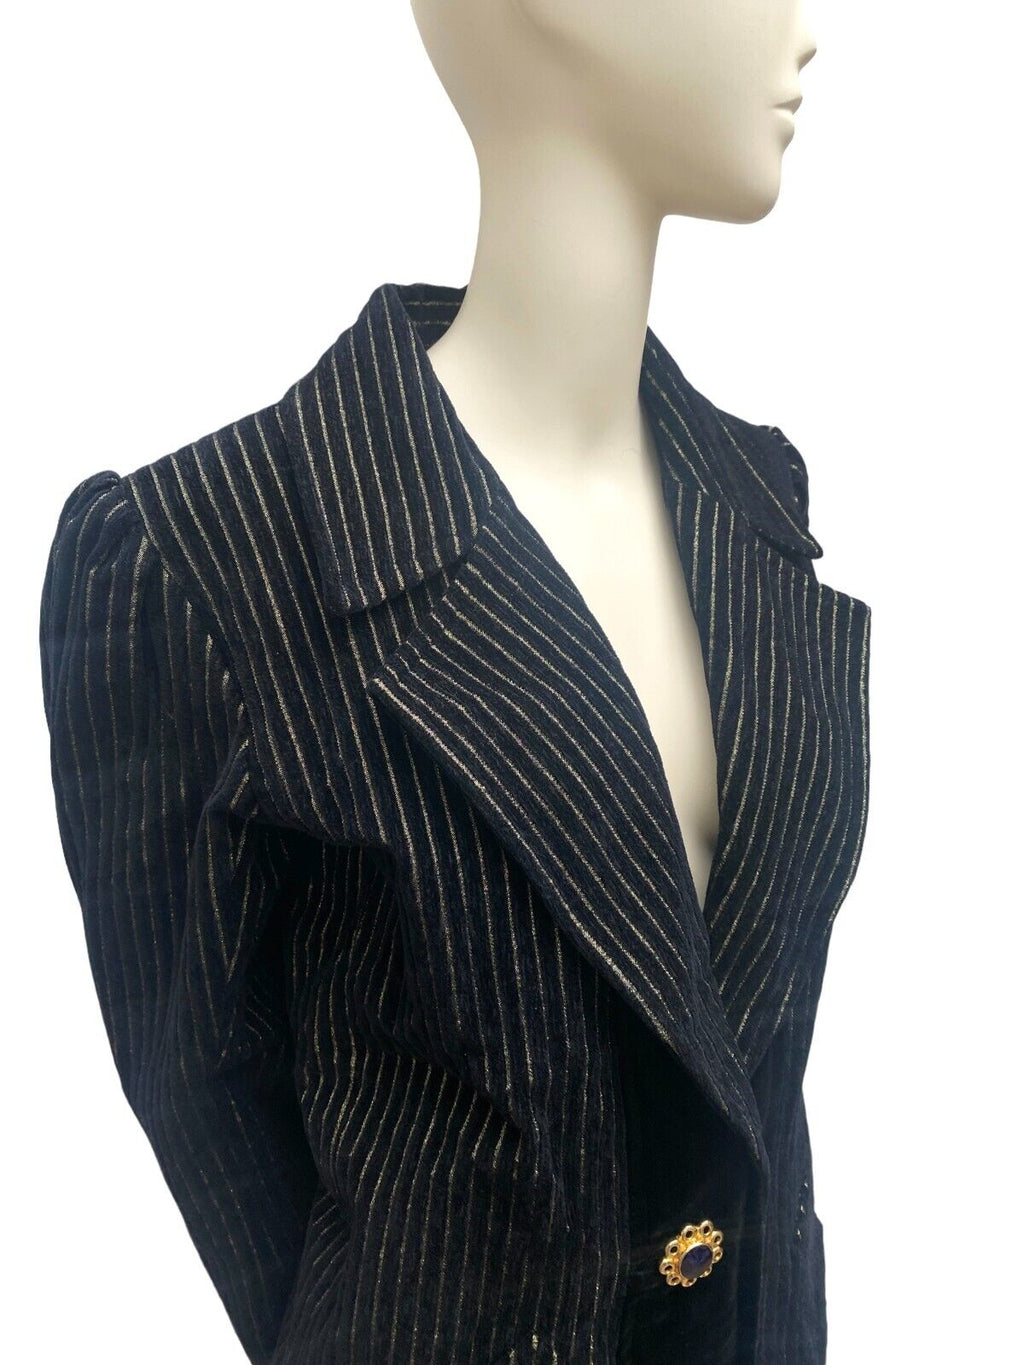 Rive Gauche One of a kind Vintage Striped Suit